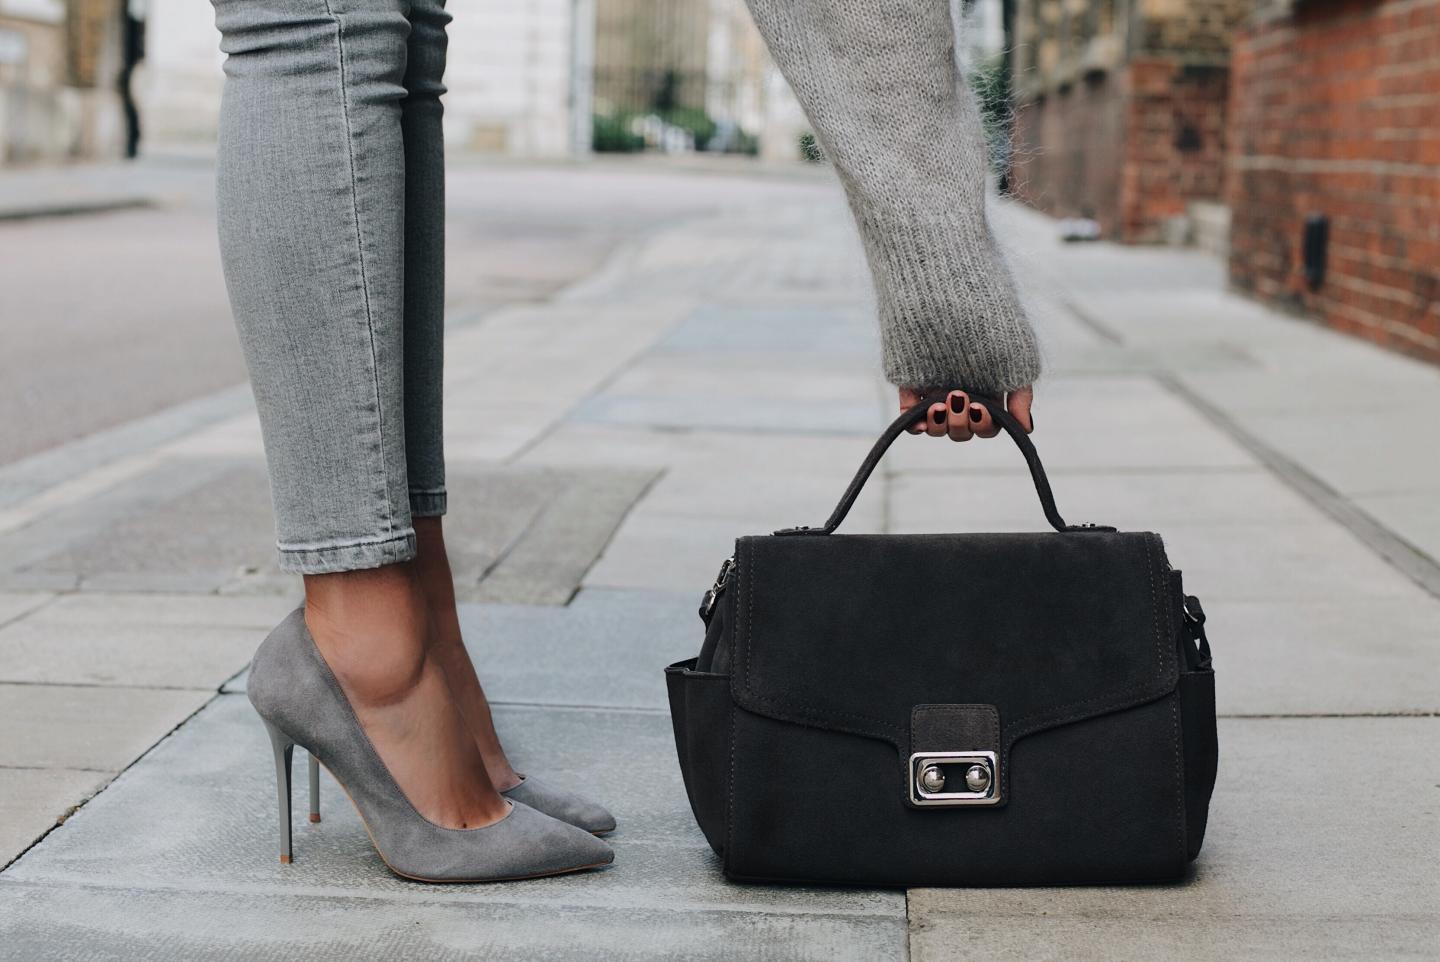 Grey suede pumps, grey skinny jeans, grey fluffy sweater, grey suede bag, grey outfit details